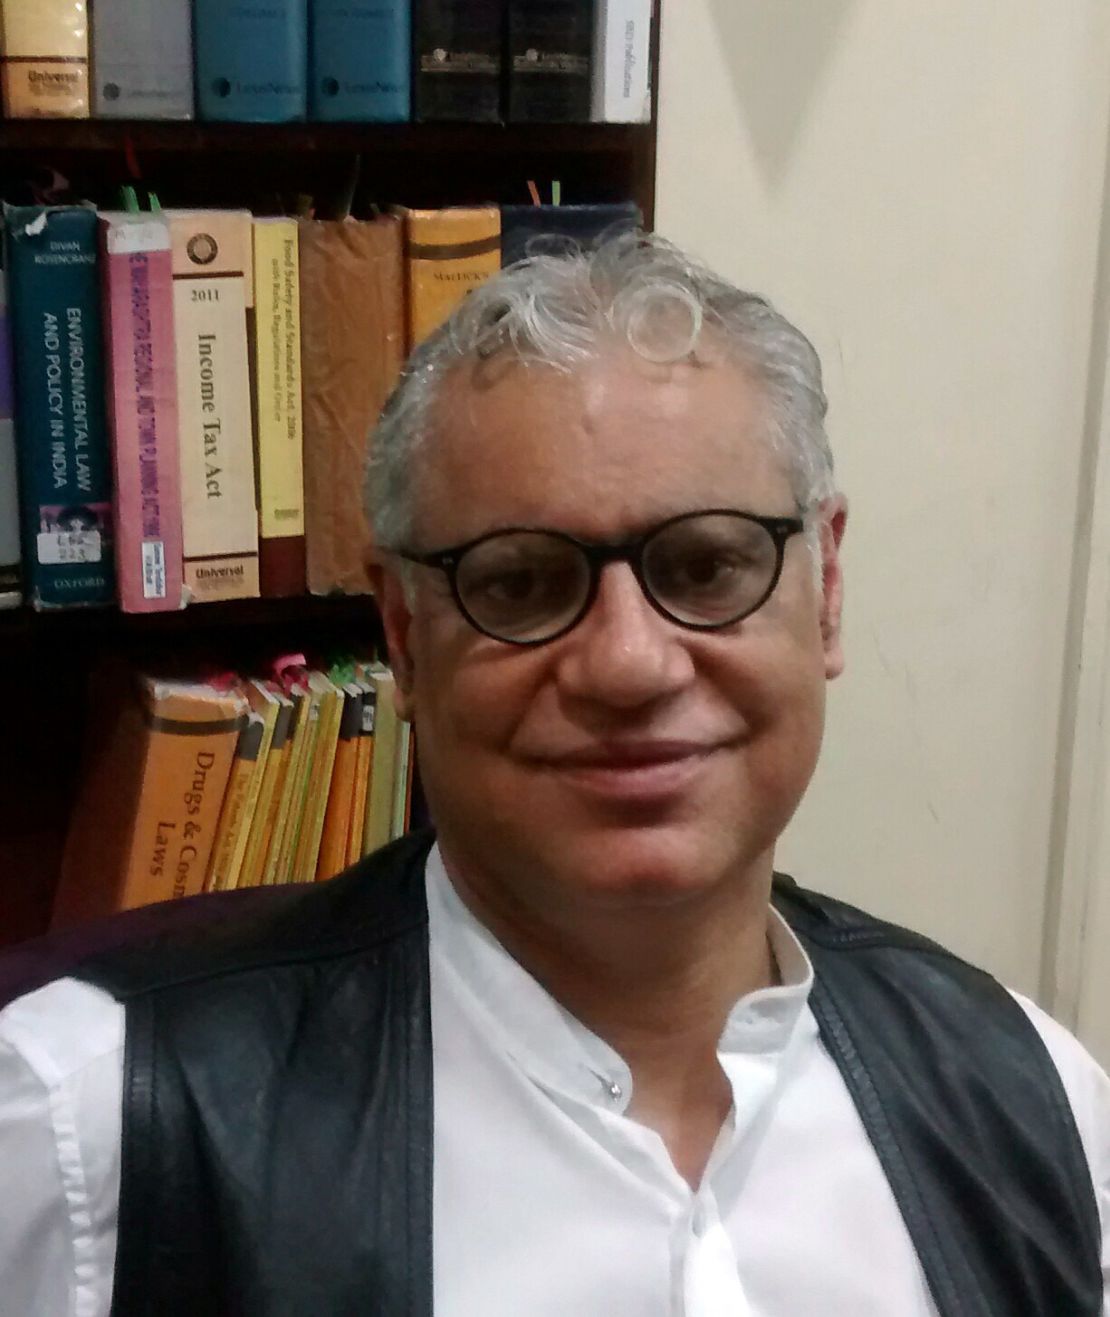 Anand Grover, former U.N. Special Rapporteur on the Right to Health, India